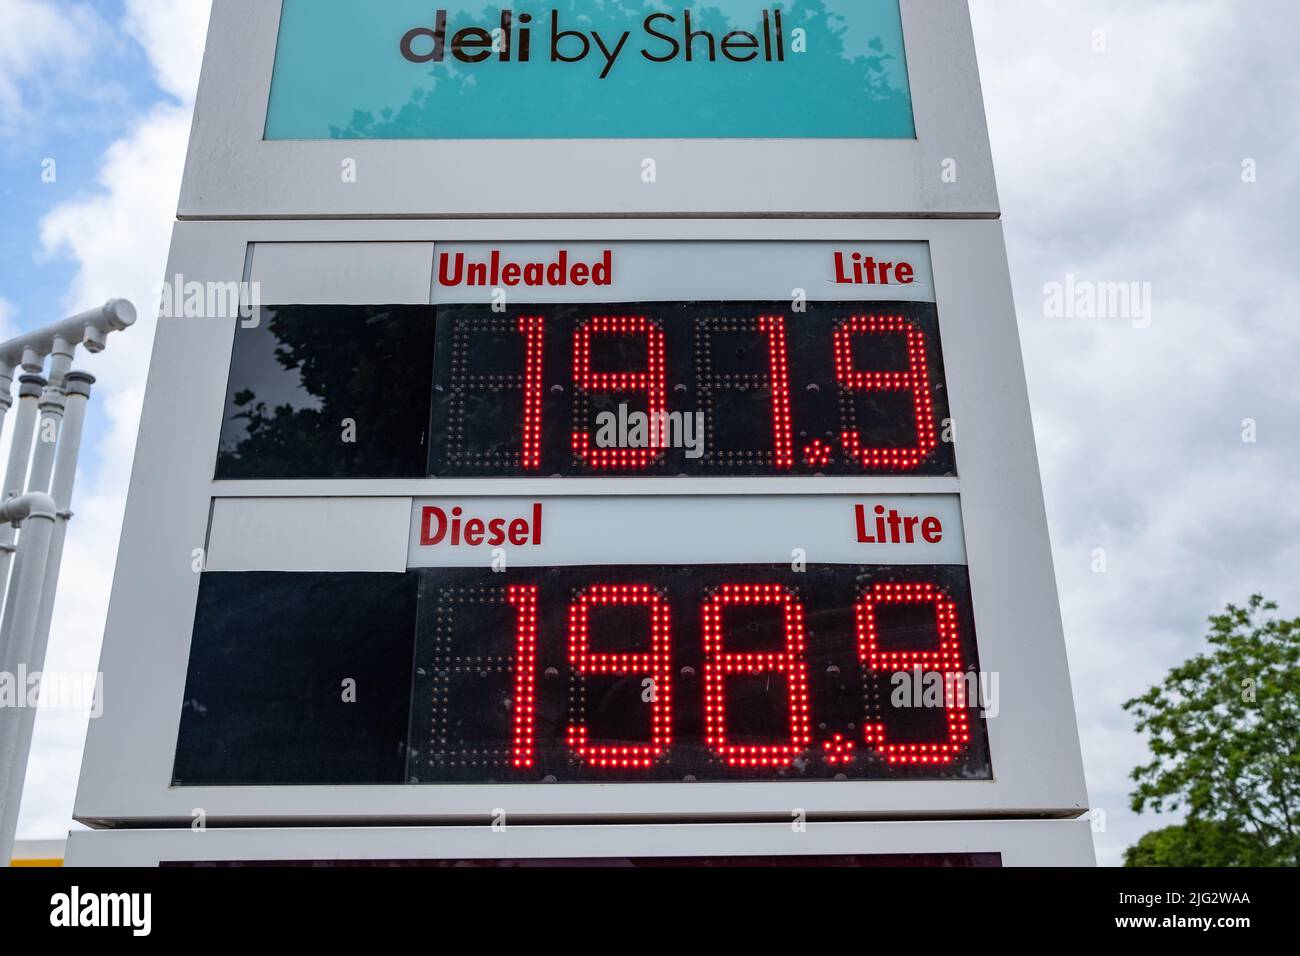 London- June 2022: Shell service petrol station sign and prices Stock Photo